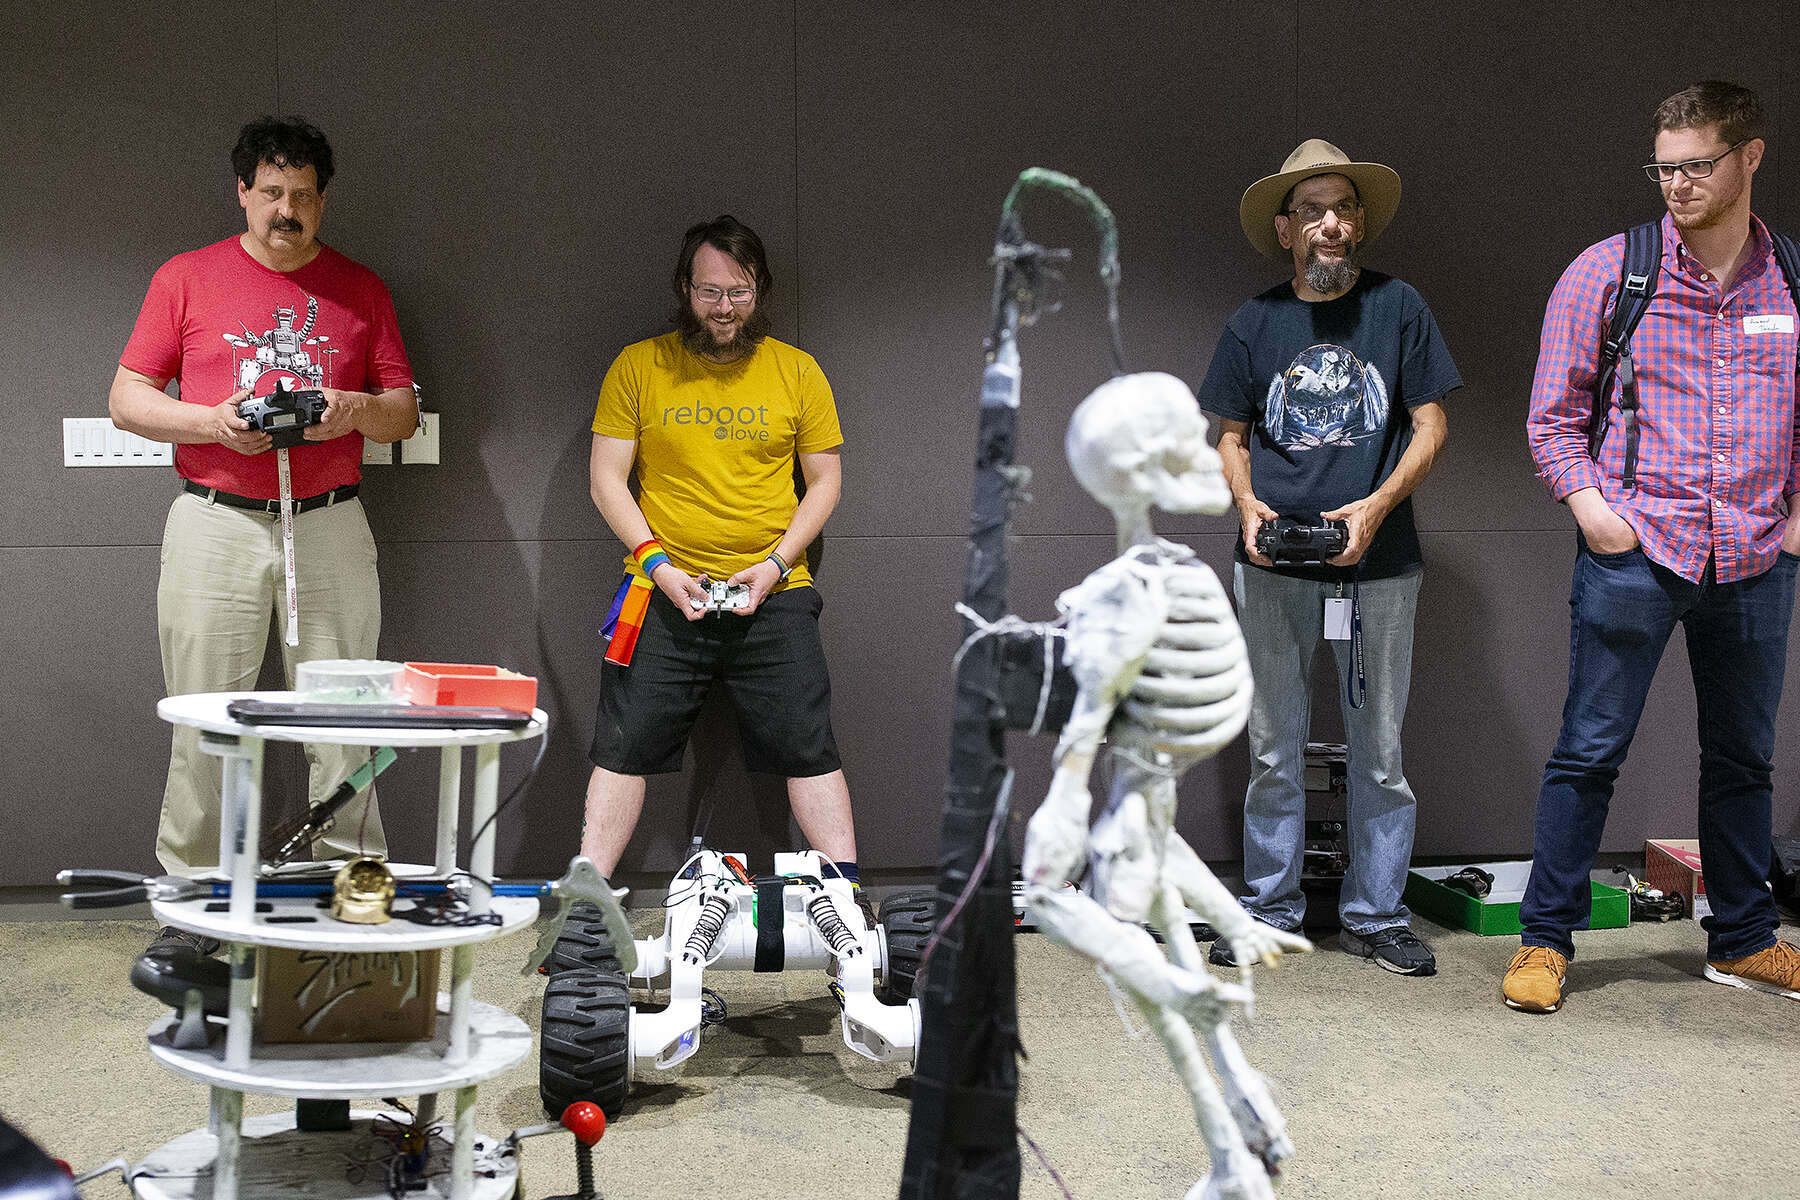 John Erikson (red shirt), Taylor Alexander (yellow shirt) and Stephen Okay (black t-shirt with hat) make their robots dance to music during the {quote}Robot Dance Party{quote} portion of the HomeBrew Robotics Club meeting, in a room donated for use by Google on their campus, during the club's monthly meeting in Mountain View, Calif., on Wednesday, June 27, 2018. The club of robot enthusiasts meets once a month. The HomeBrew Robotics Club grew out of what was the original HomeBrew Computer Club, which was very important in the history of the development of personal computing. The meeting was a special {quote}bot challenge{quote} meeting where members bring robots that can they can use to try to complete one of several challenges. The bot challenge meetings serve to encourage members to work on robots. CONTACTS: John Erikson (red shirt) surf_er_man@yahoo.comTaylor Alexander (yellow shirt)18840 Los Gatos Rd. Los Gatos, CAStephen Okay (black t-shirt)584 Castro Street #304San Francisco, CA 94114